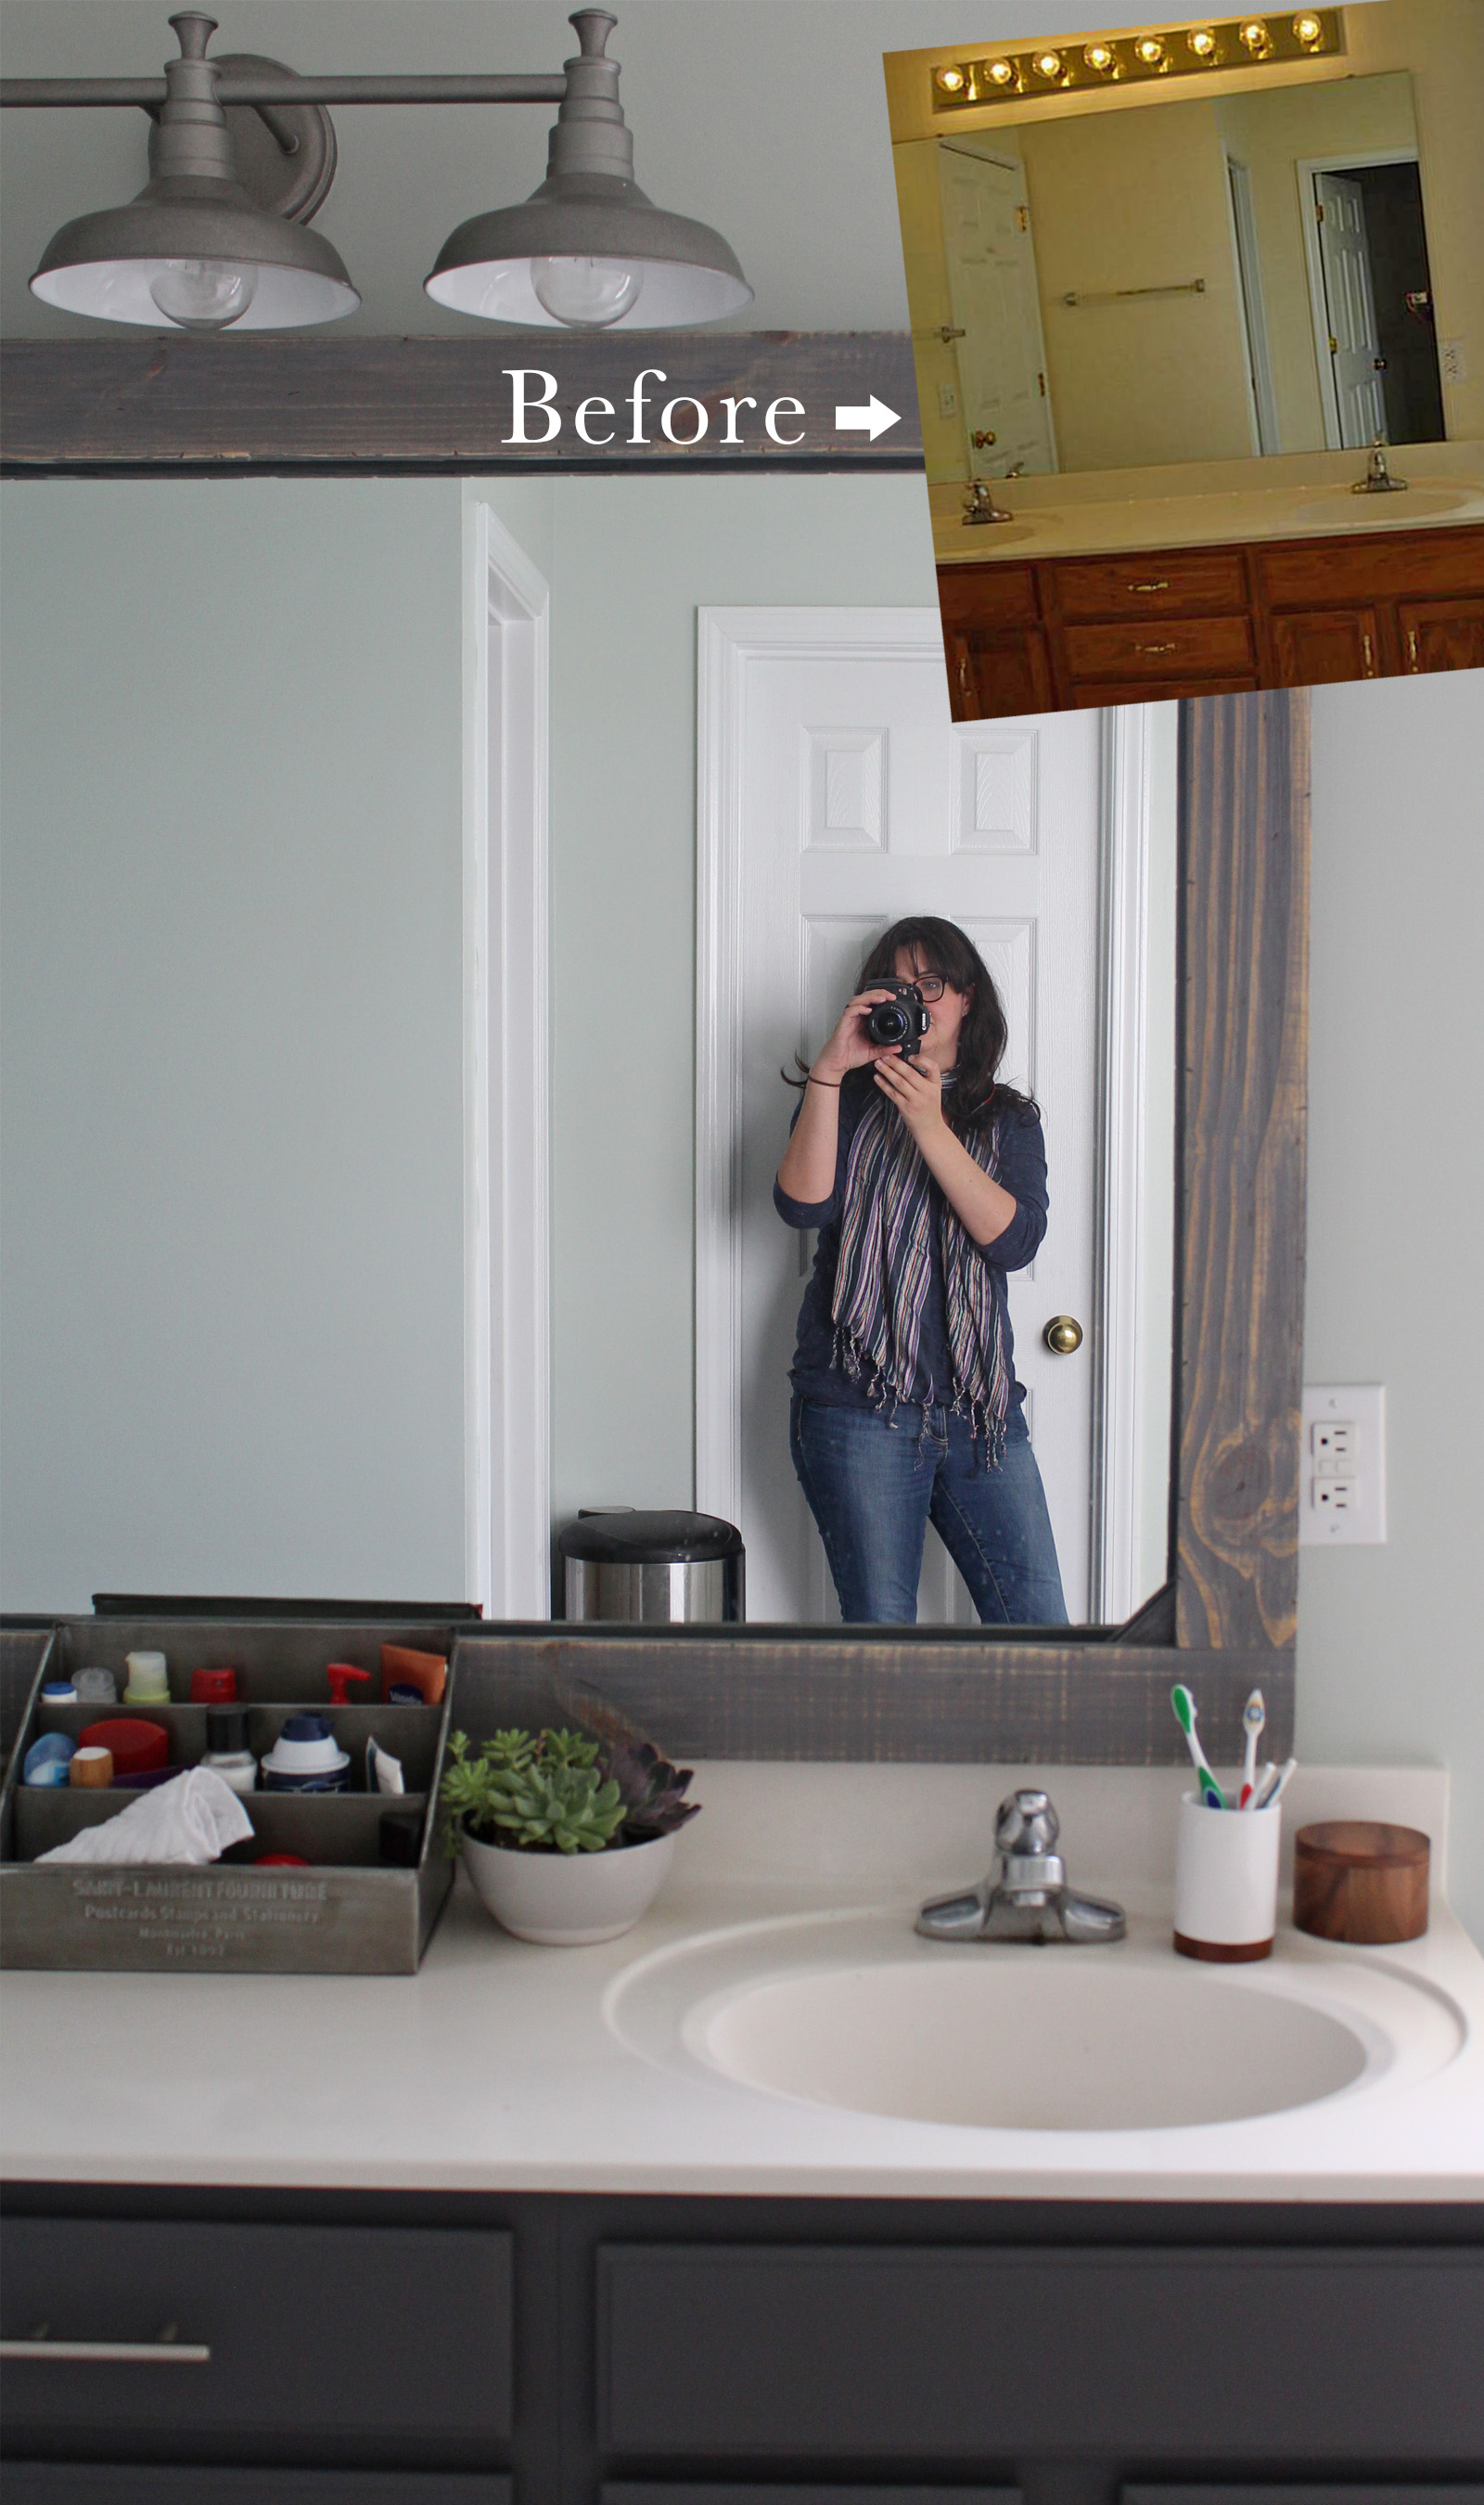 How To Frame A Mirror With Wood Tag, How To Add A Frame Around Bathroom Mirror